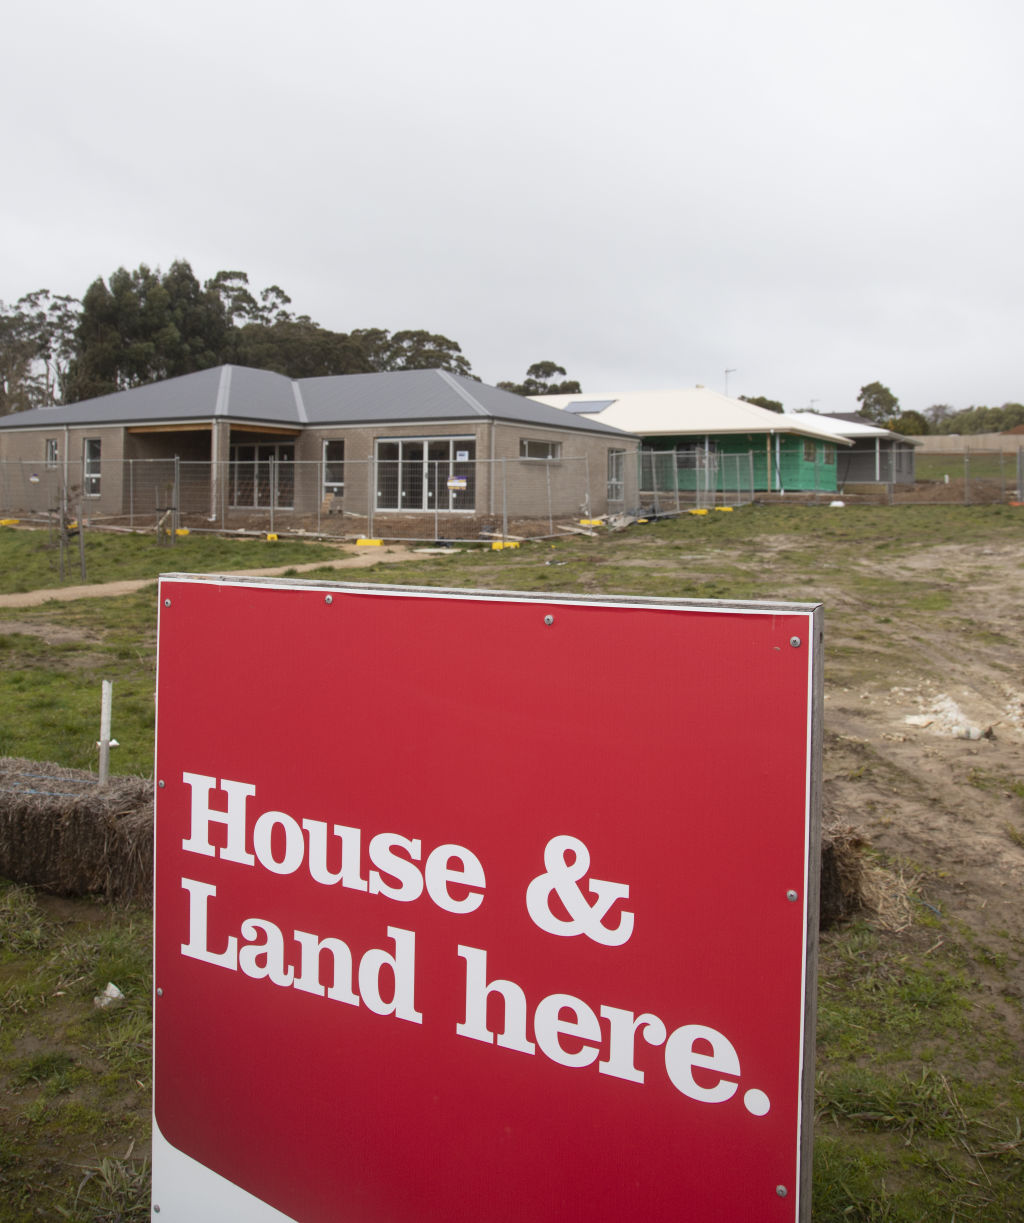 New homes in regional cities like Ballarat are becoming more expensive. Photo: Leigh Henningham